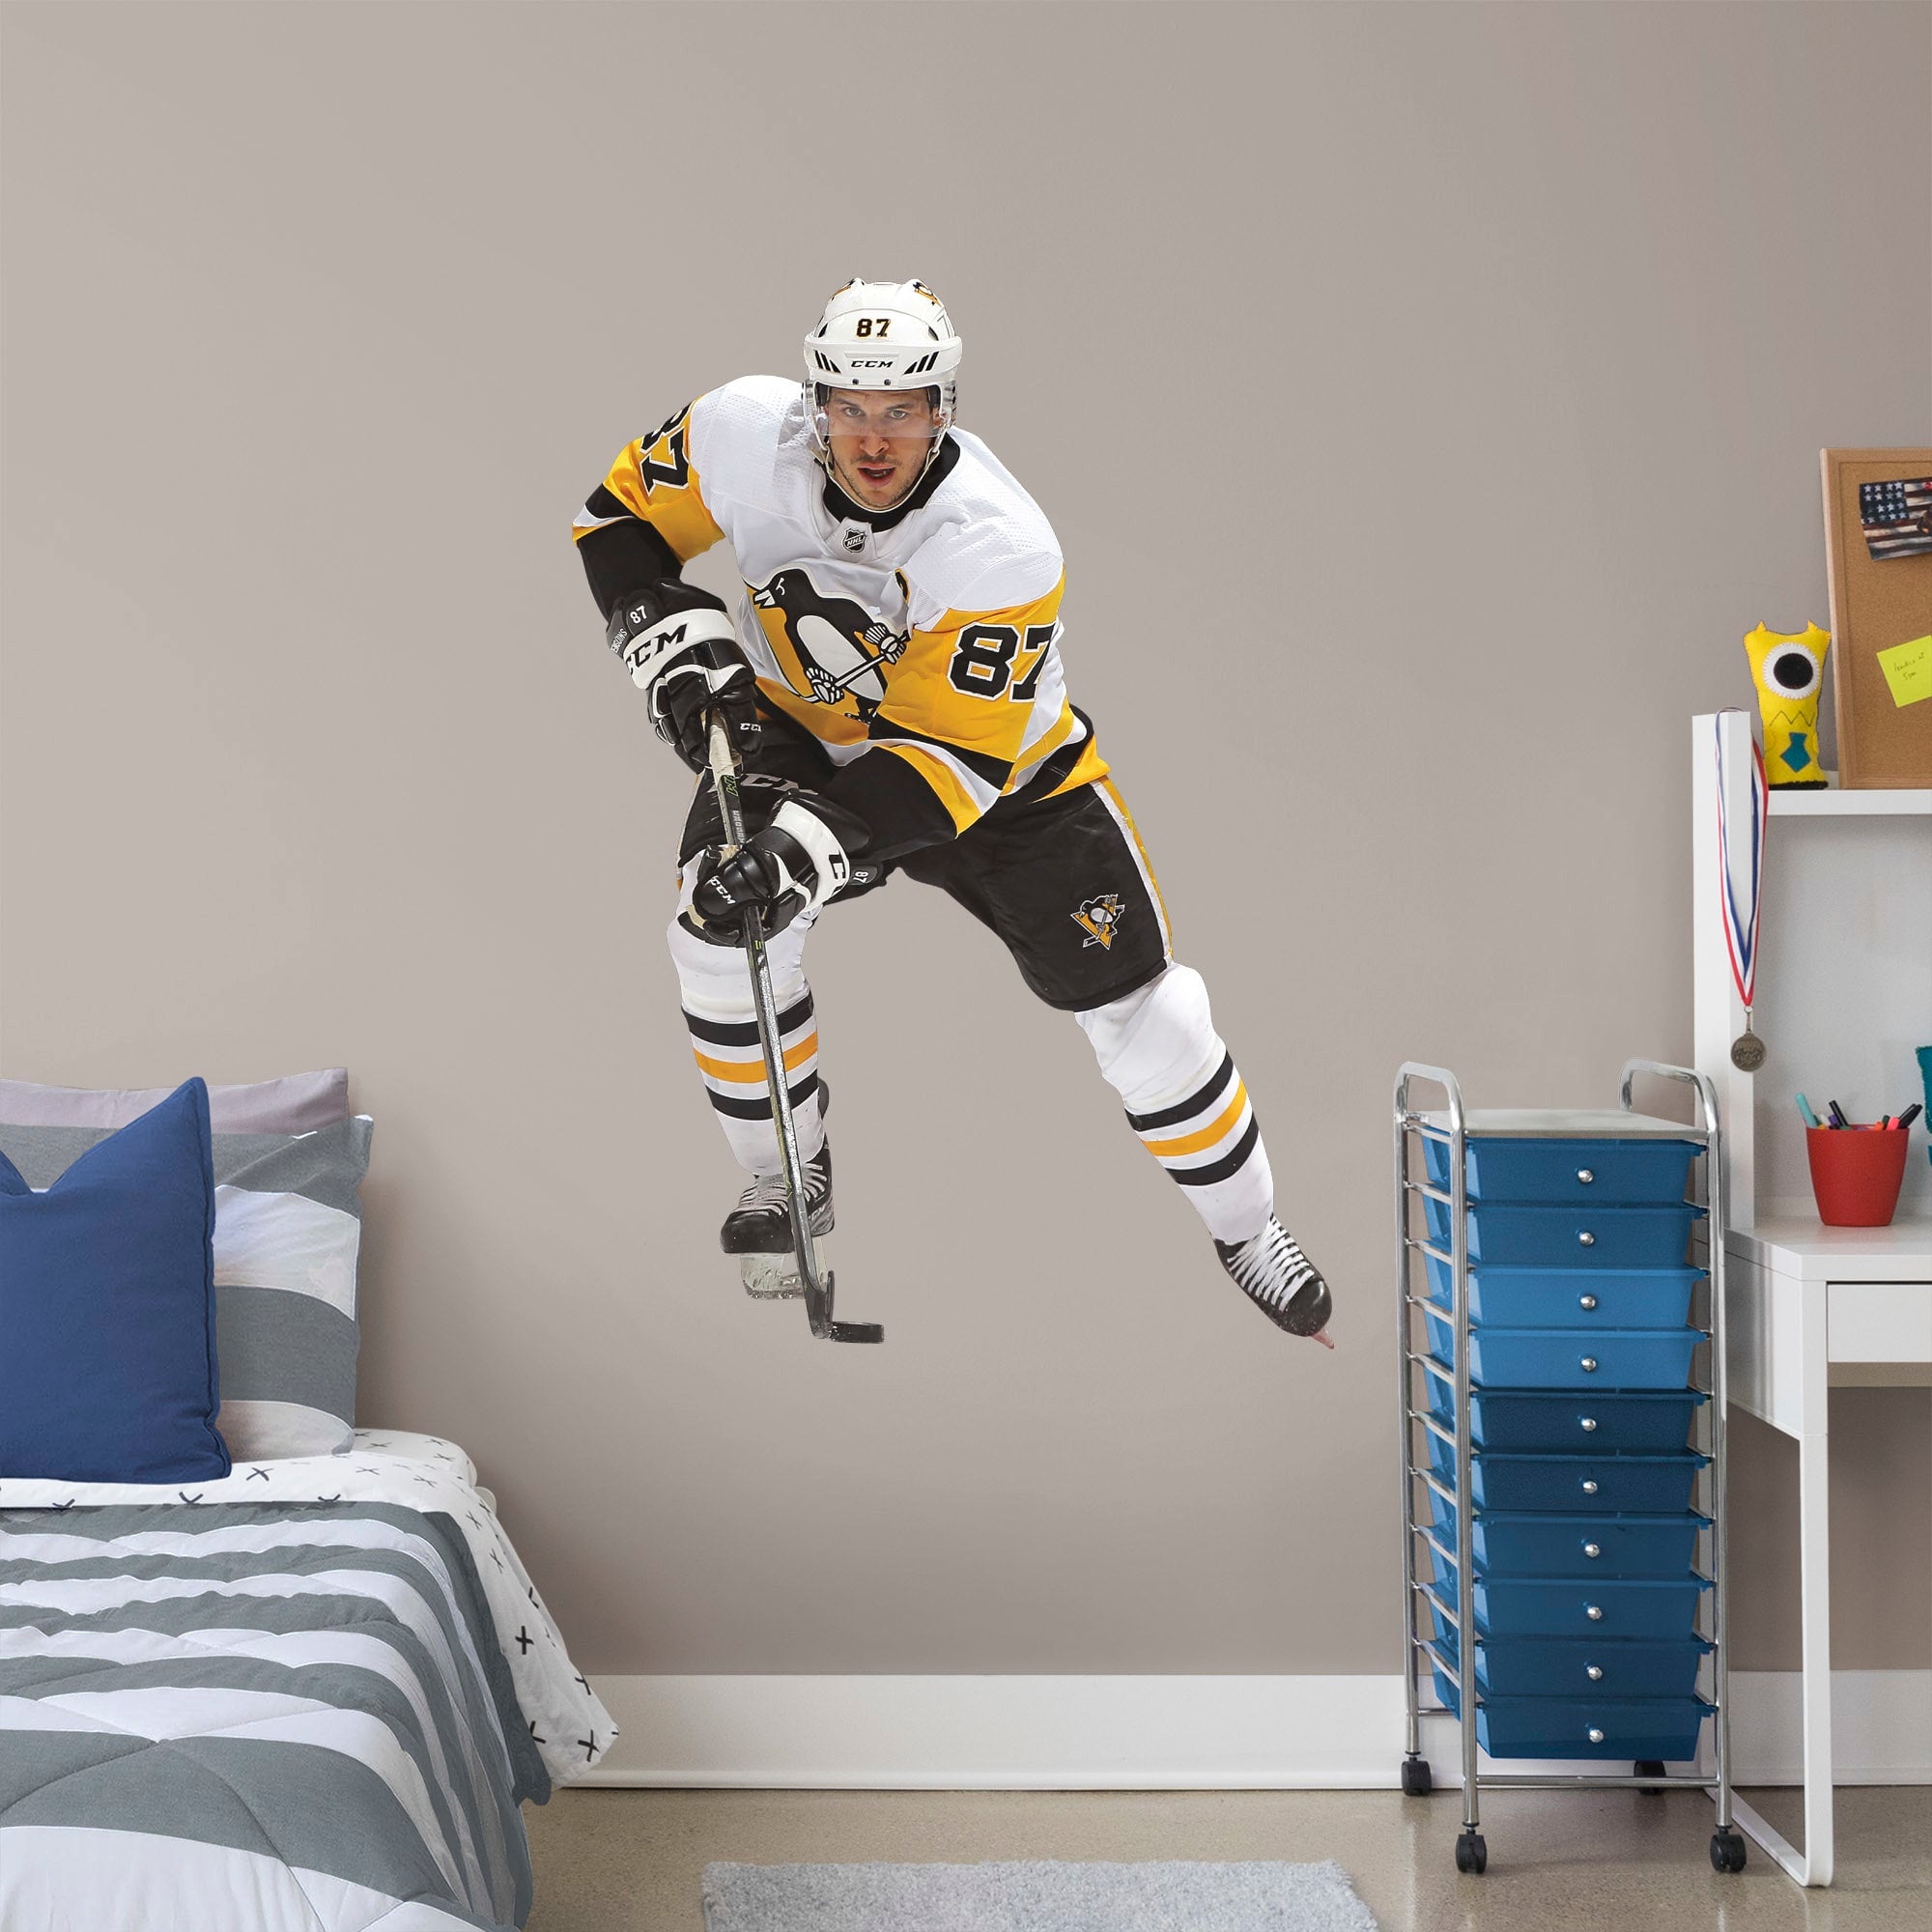 Sidney Crosby for Pittsburgh Penguins - Officially Licensed NHL Removable Wall Decal Giant Athlete + 2 Decals (36"W x 50"H) by F